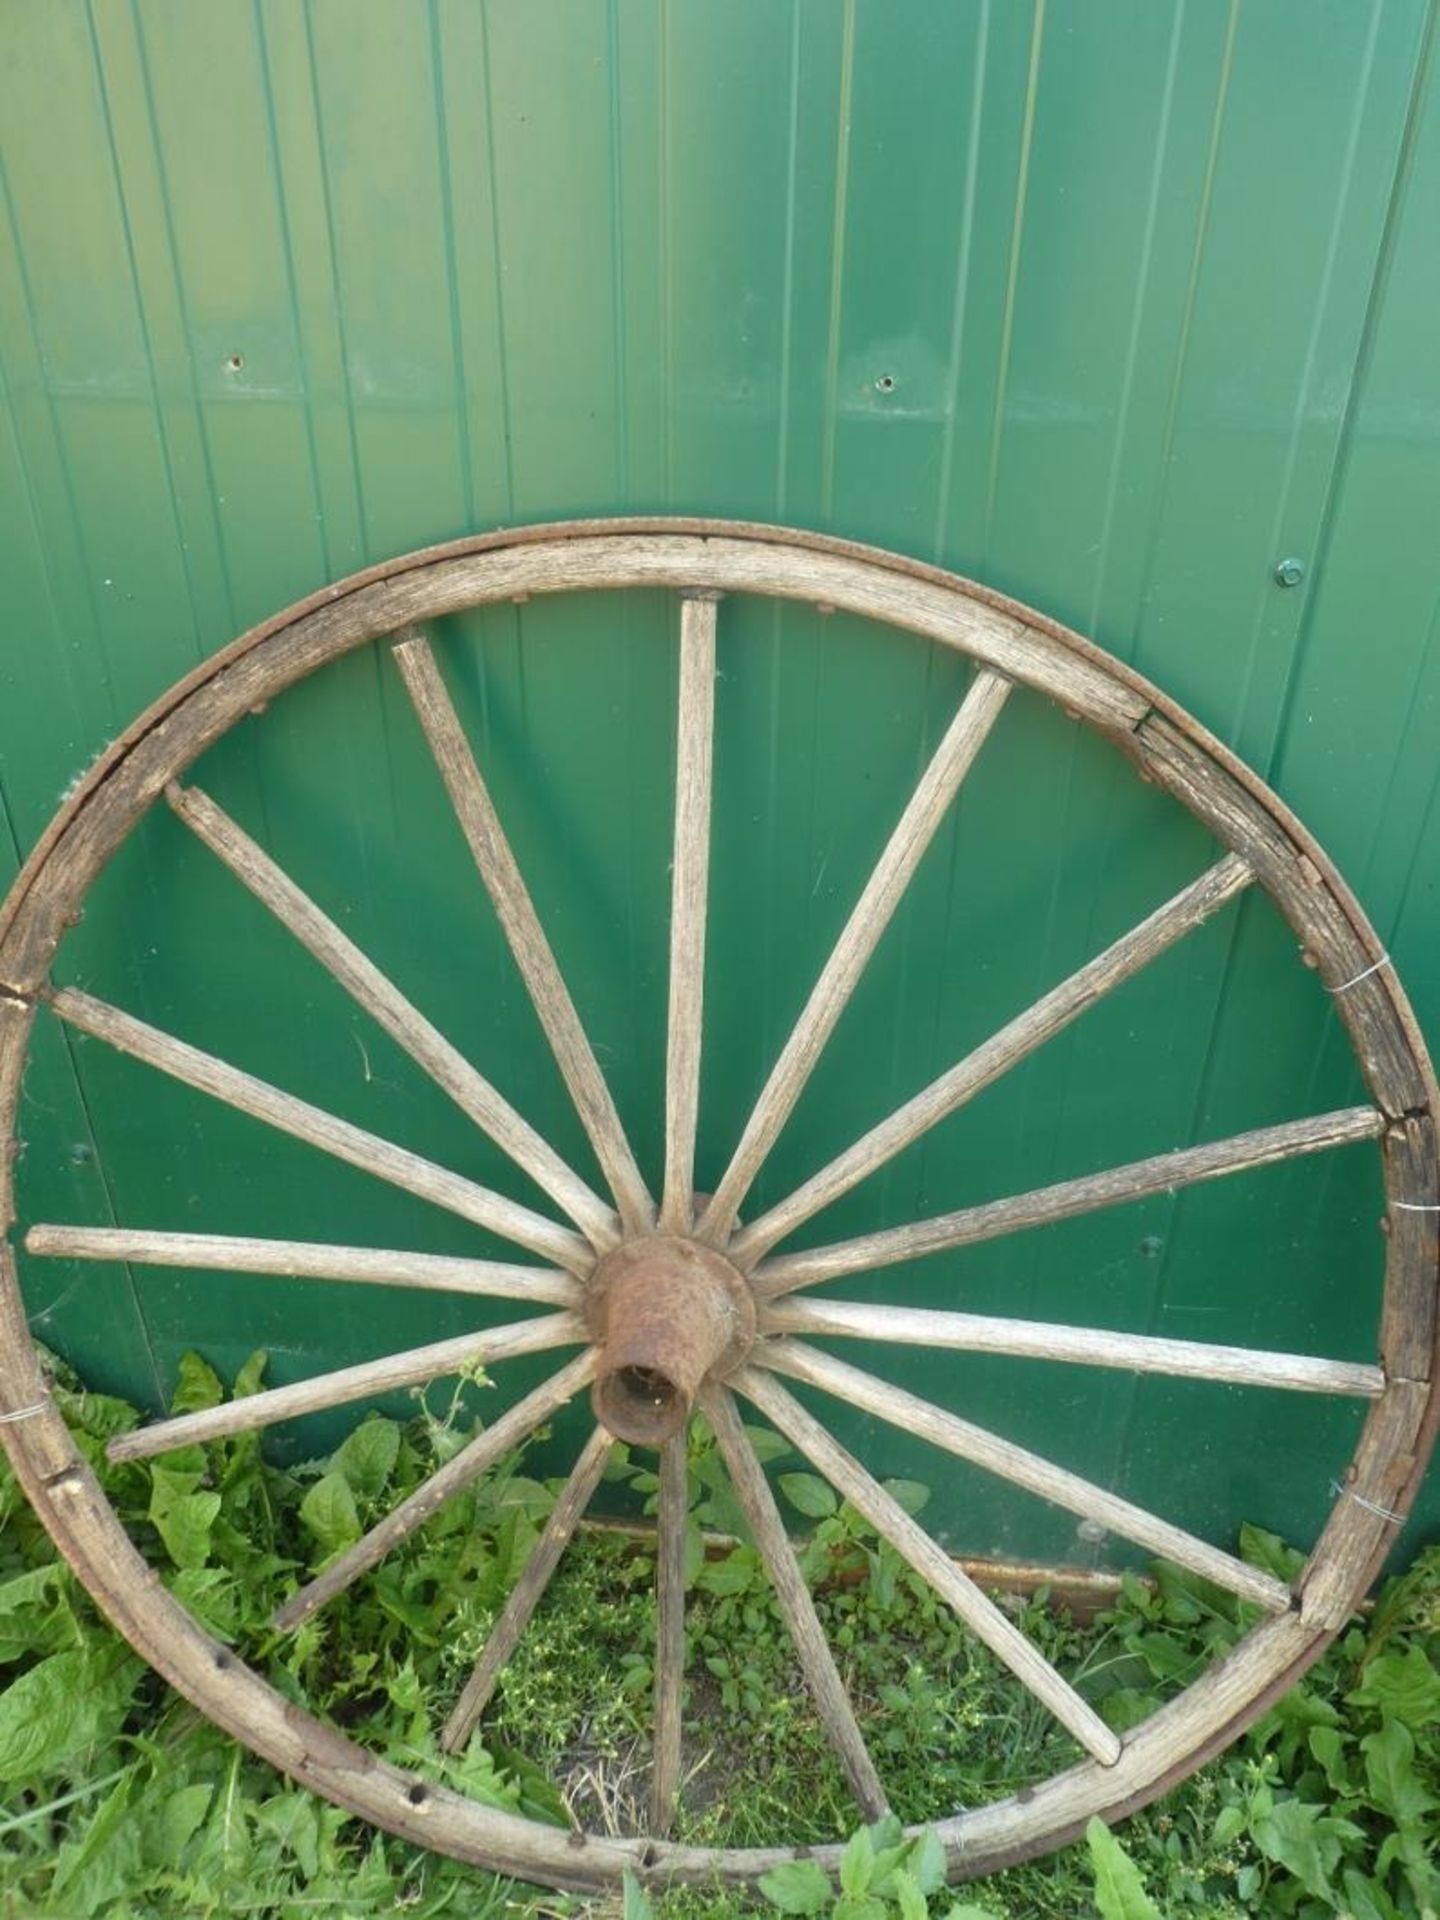 2 BUGGY WHEELS & 1 WAGON WHEEL (ALL IN POOR SHAPE) - Image 3 of 4